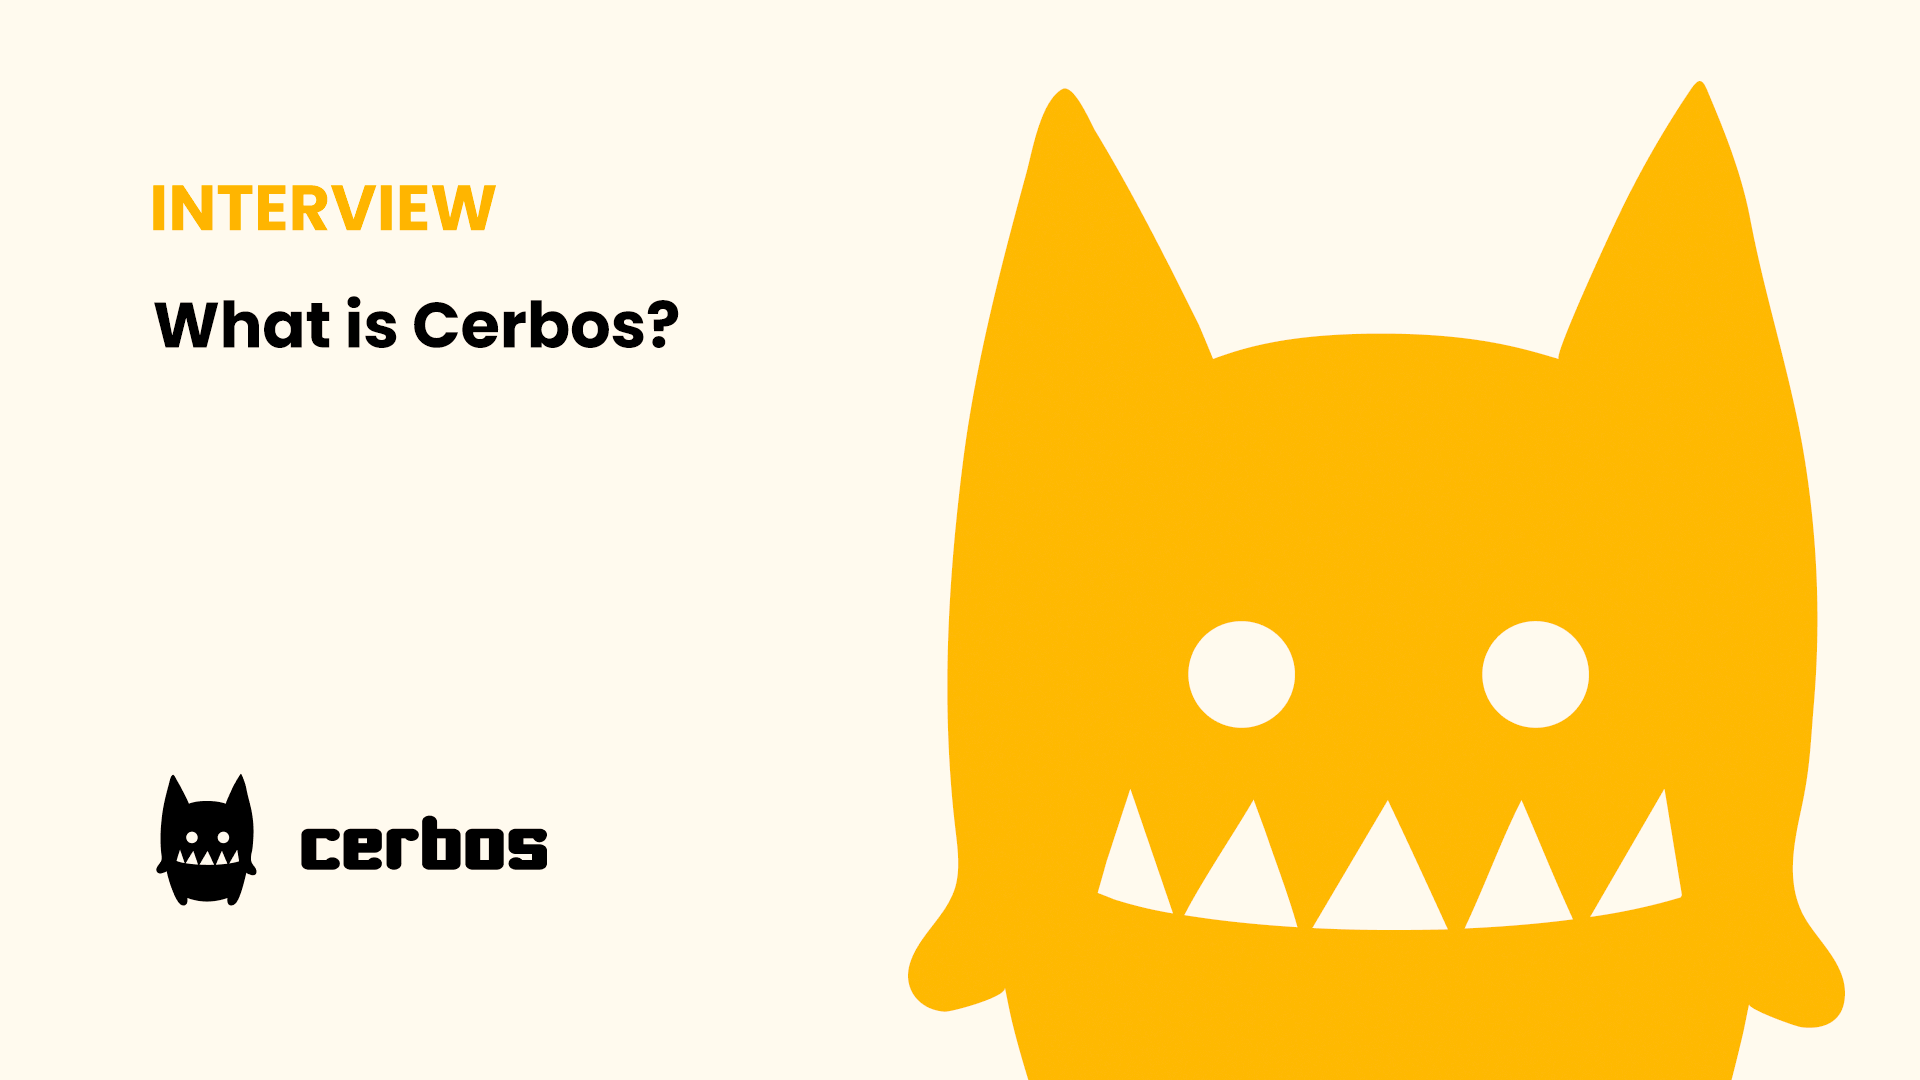 What is Cerbos?